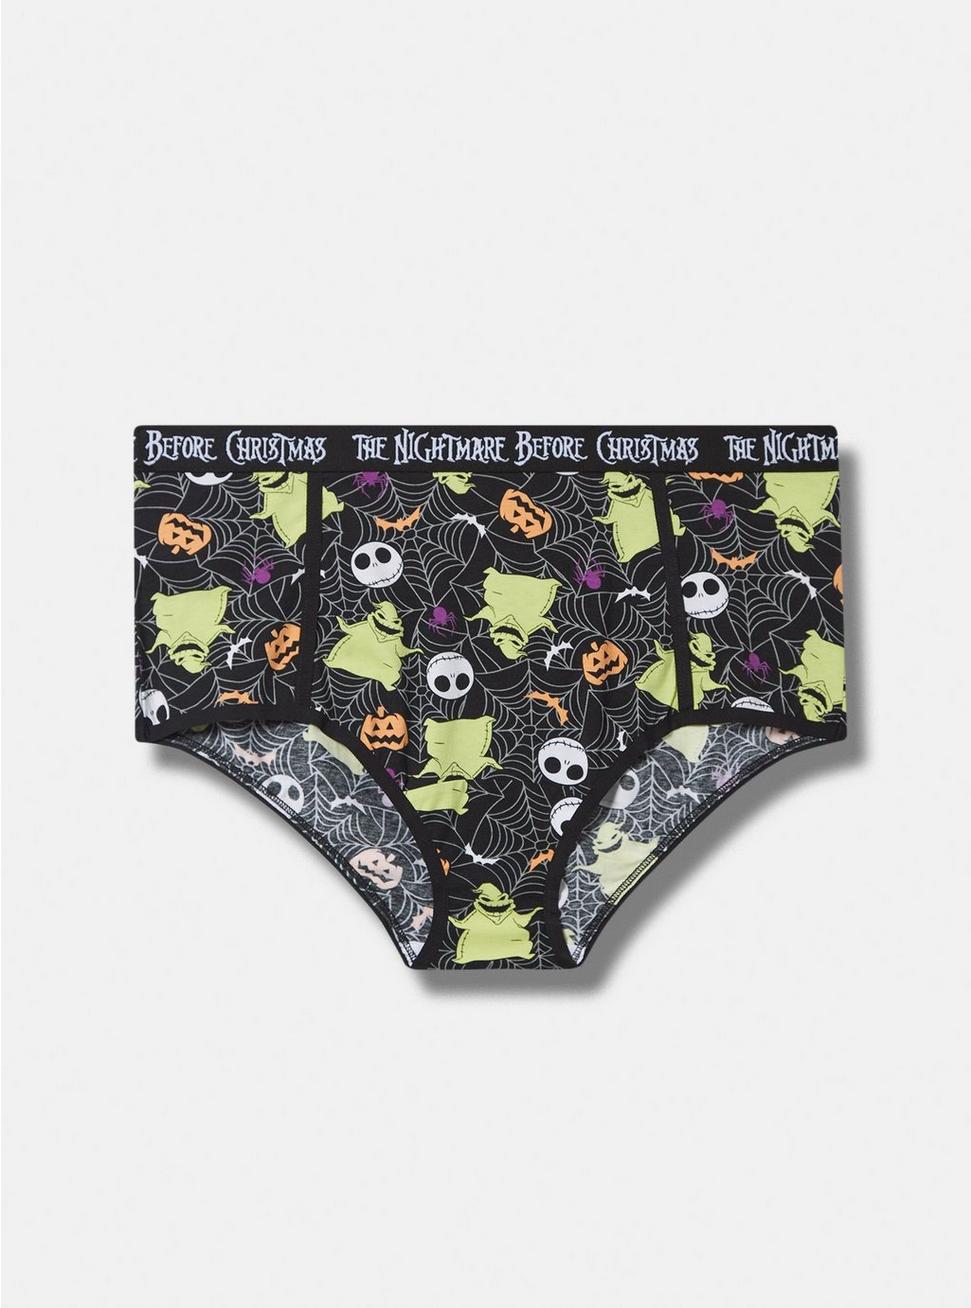 Plus Size Disney The Nightmare Before Christmas Brief Mid Rise Cotton Panty, MULTI, hi-res